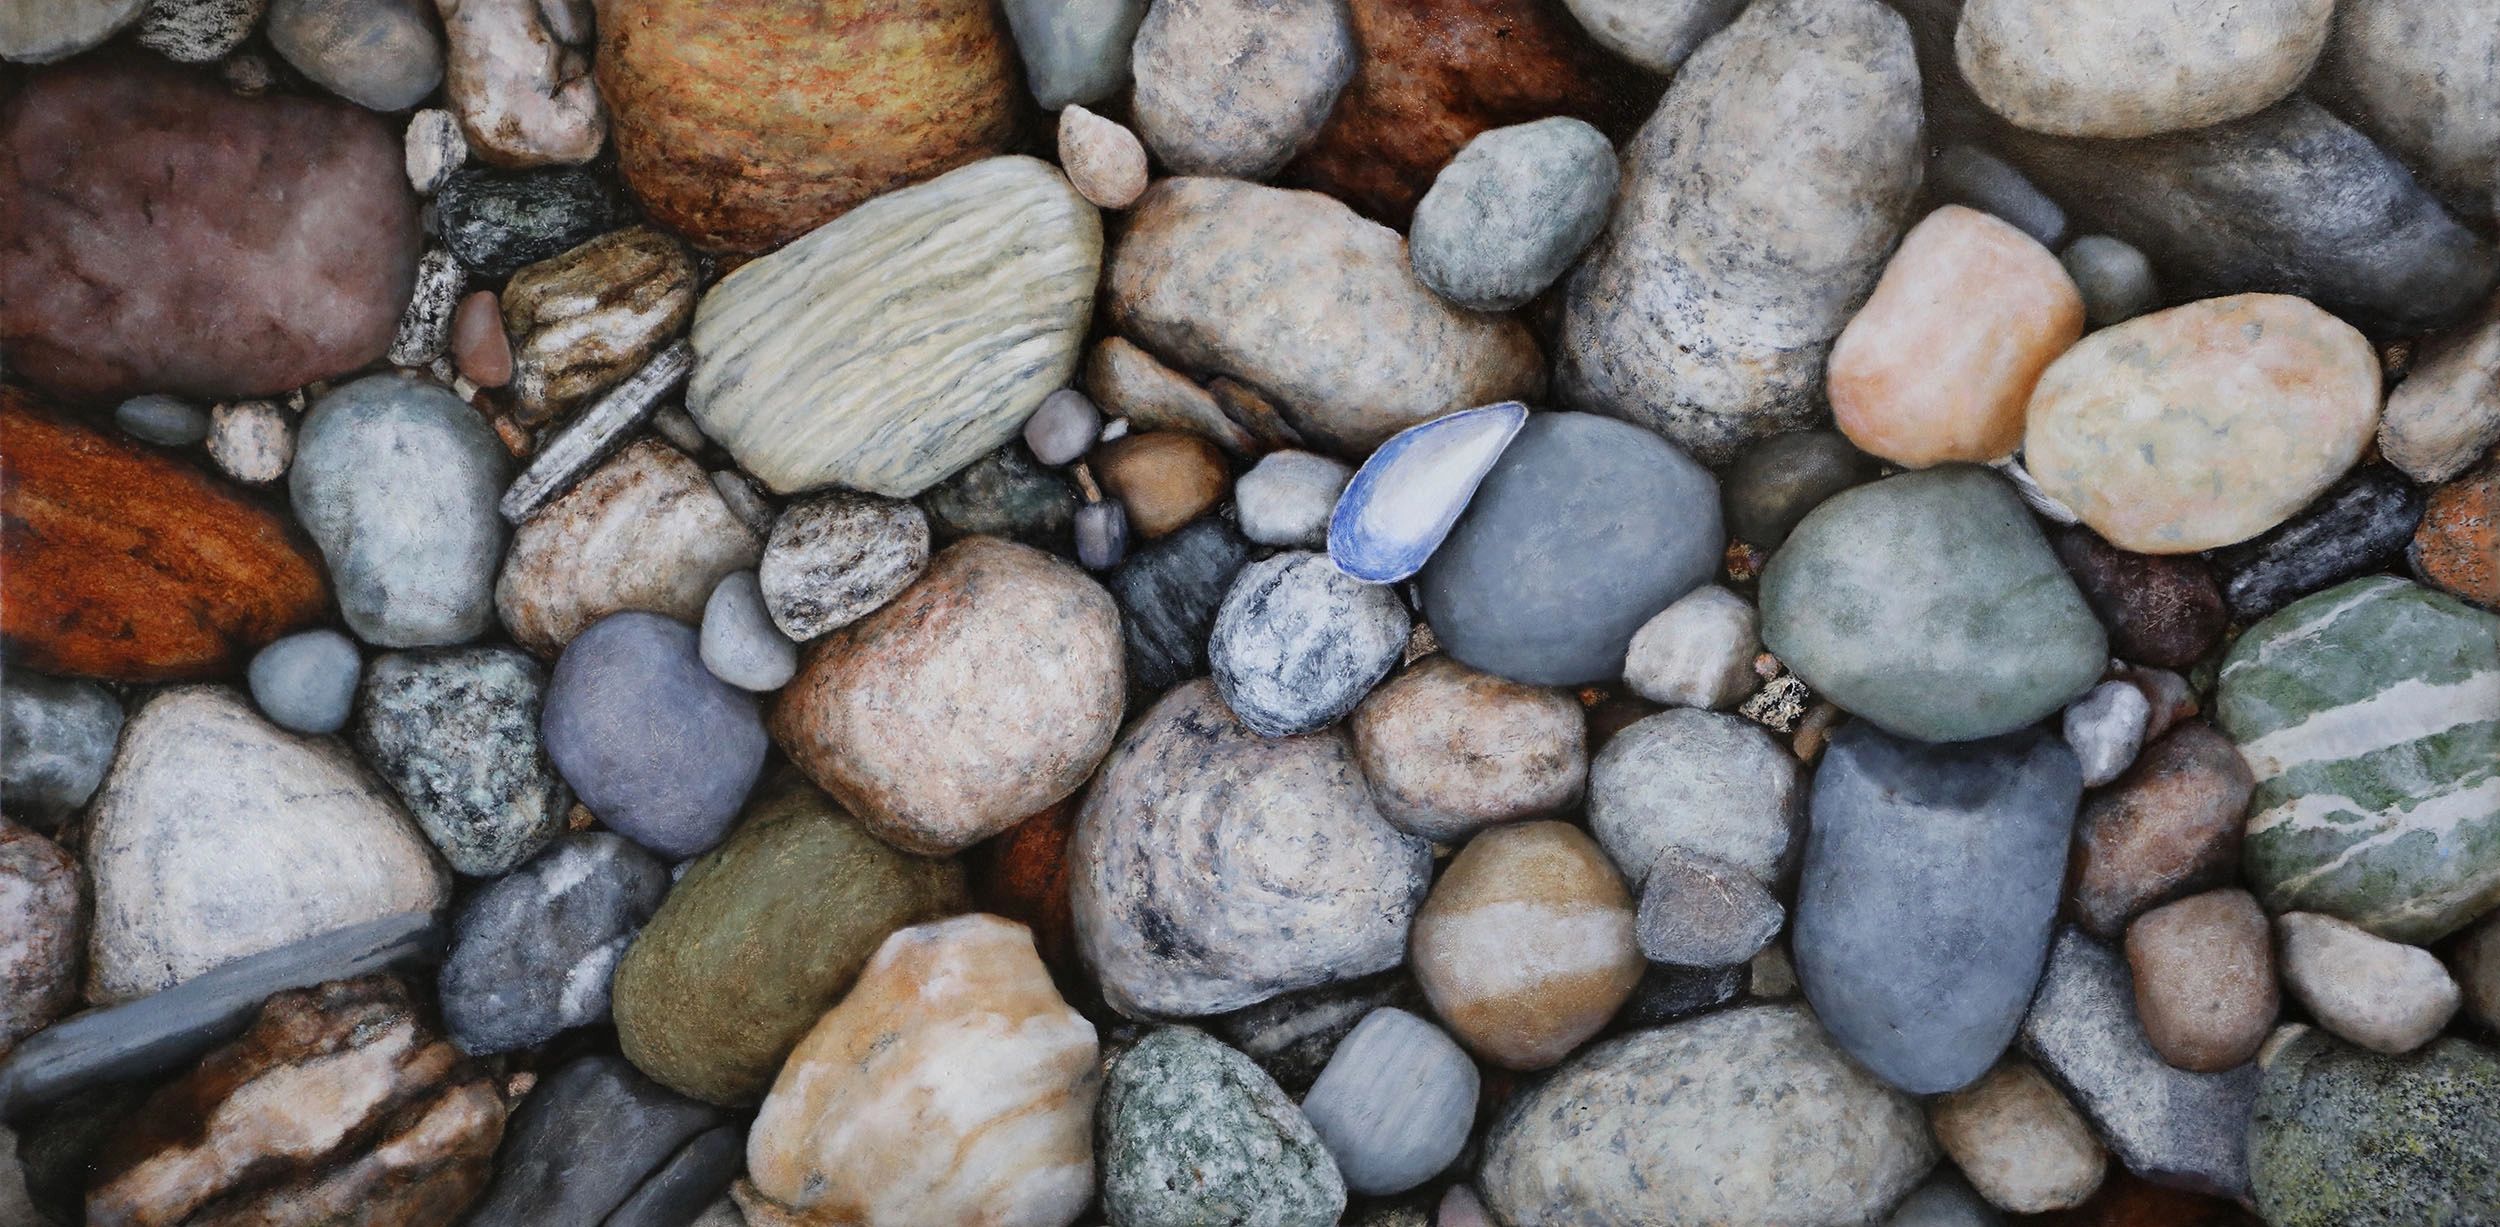 Looking straight down at many multicolored tumbled beach stones and shell